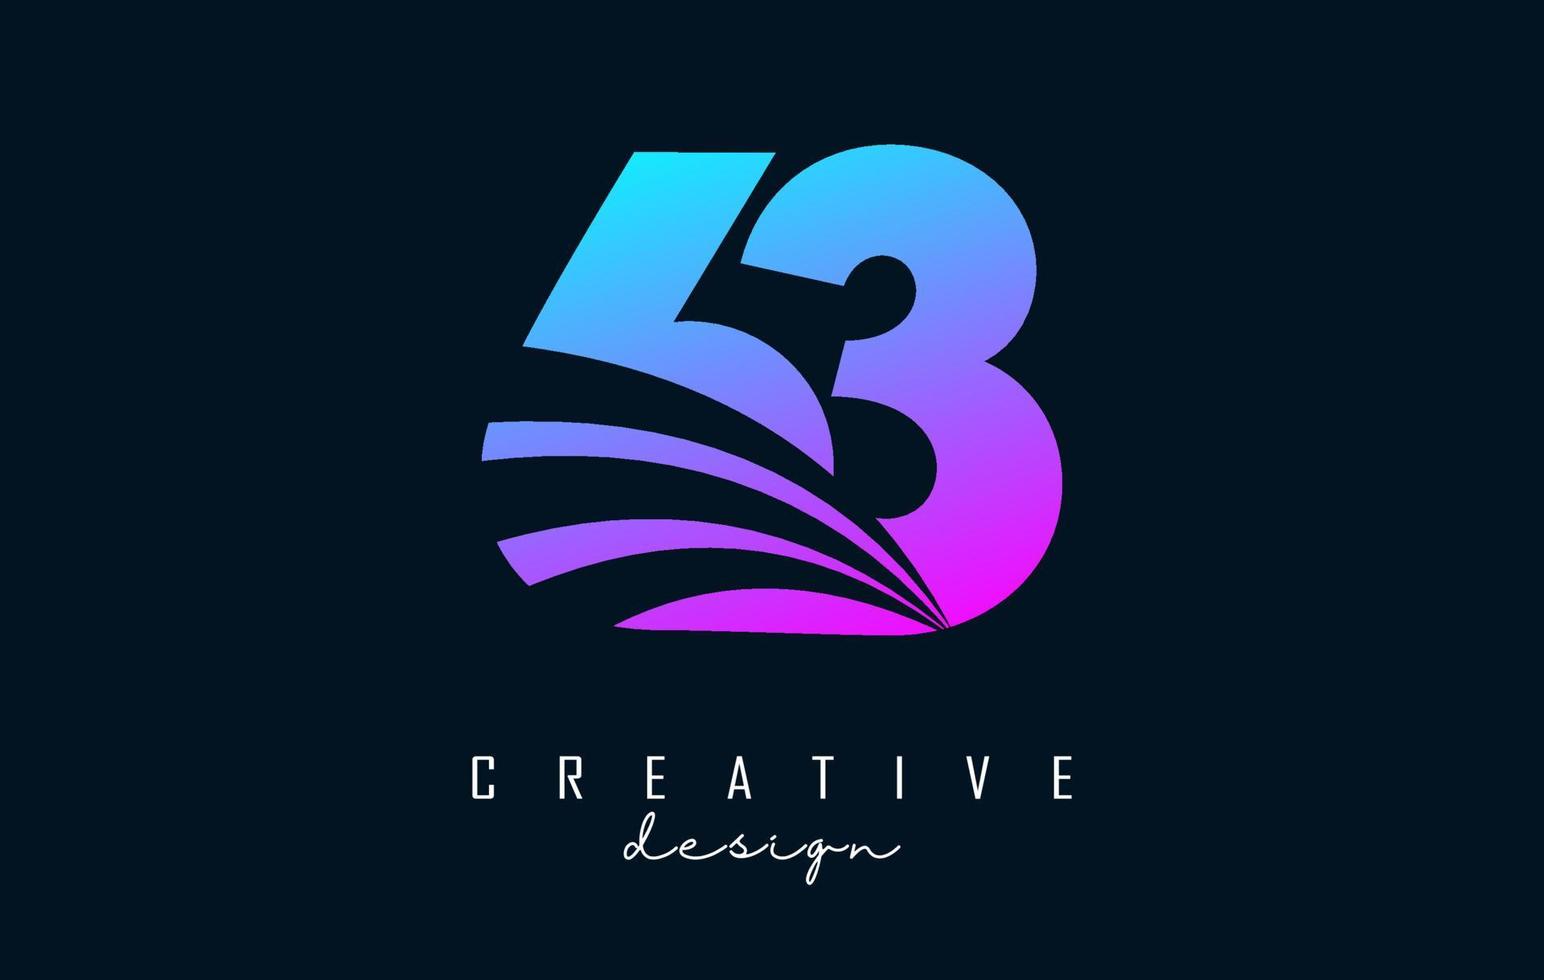 Colorful Creative number 63 6 3 logo with leading lines and road concept design. Number with geometric design. vector